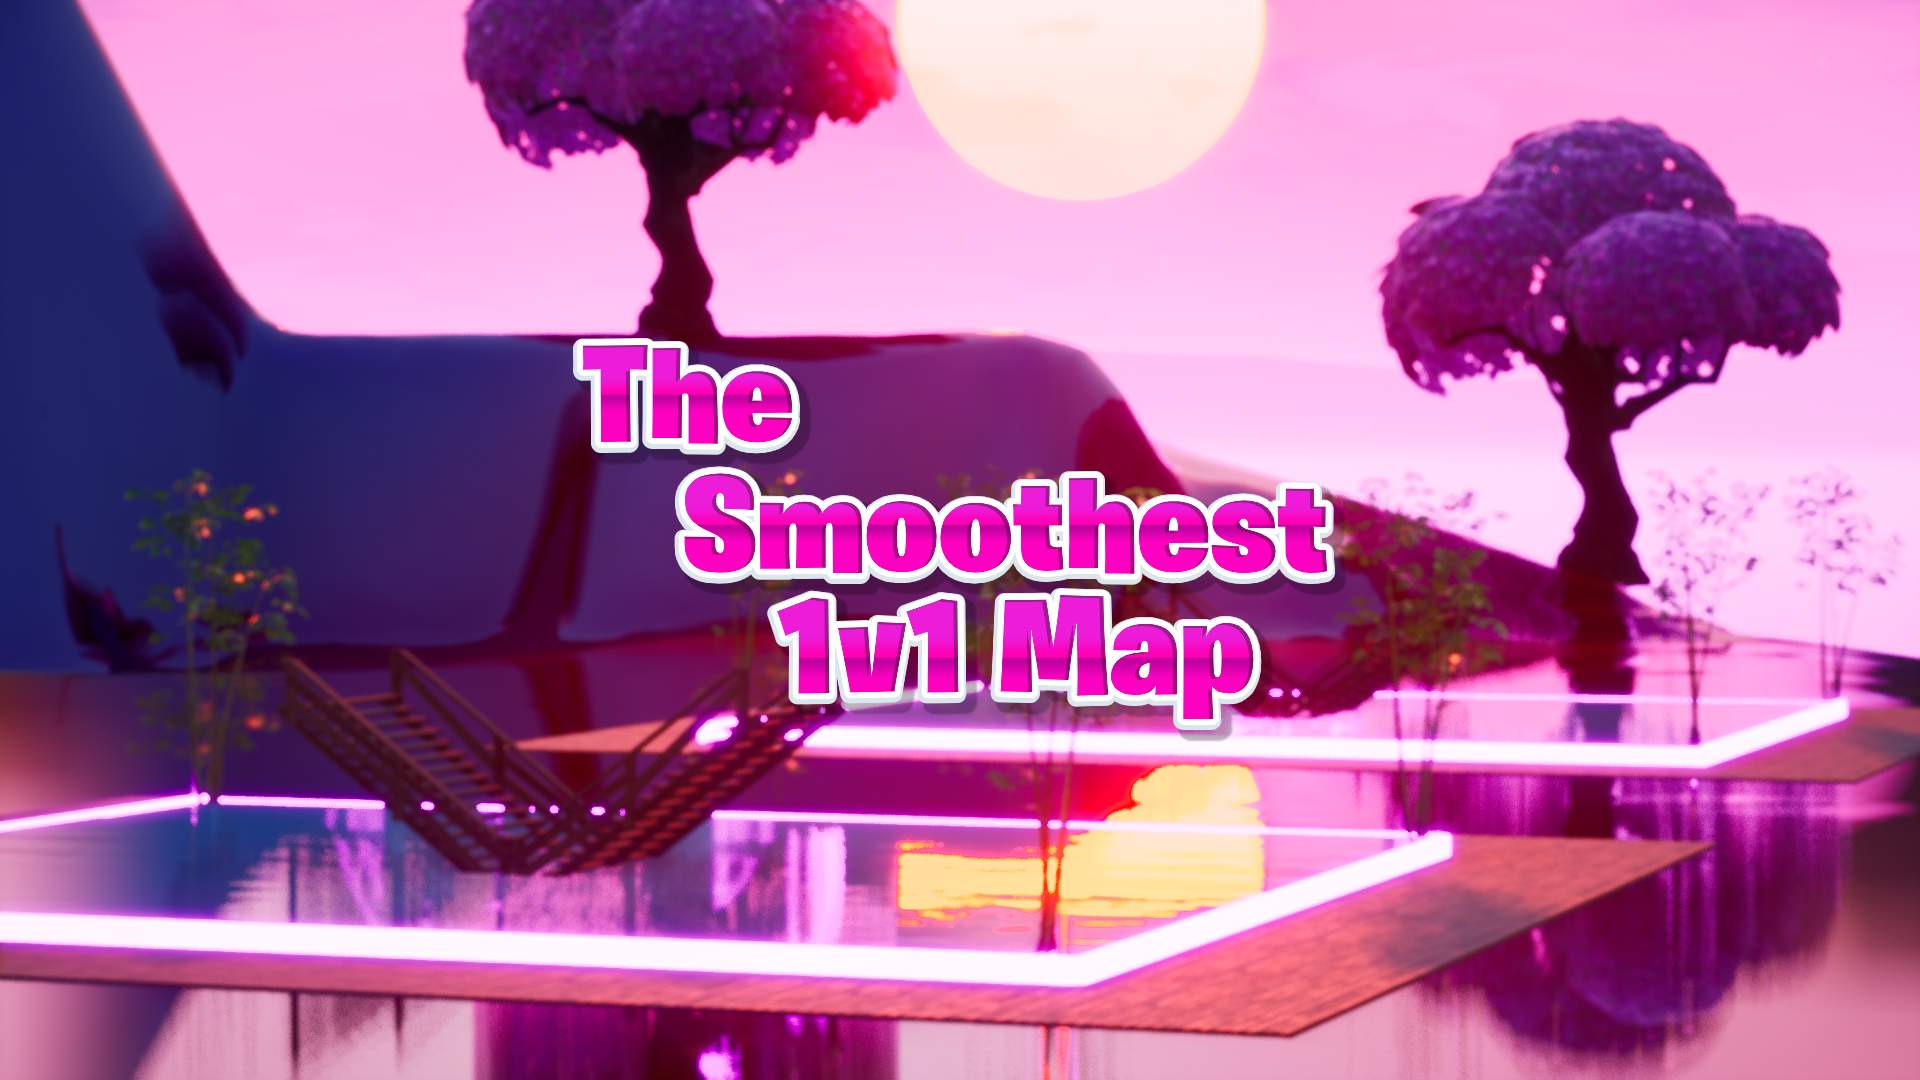 THE SMOOTHEST 1V1 MAP